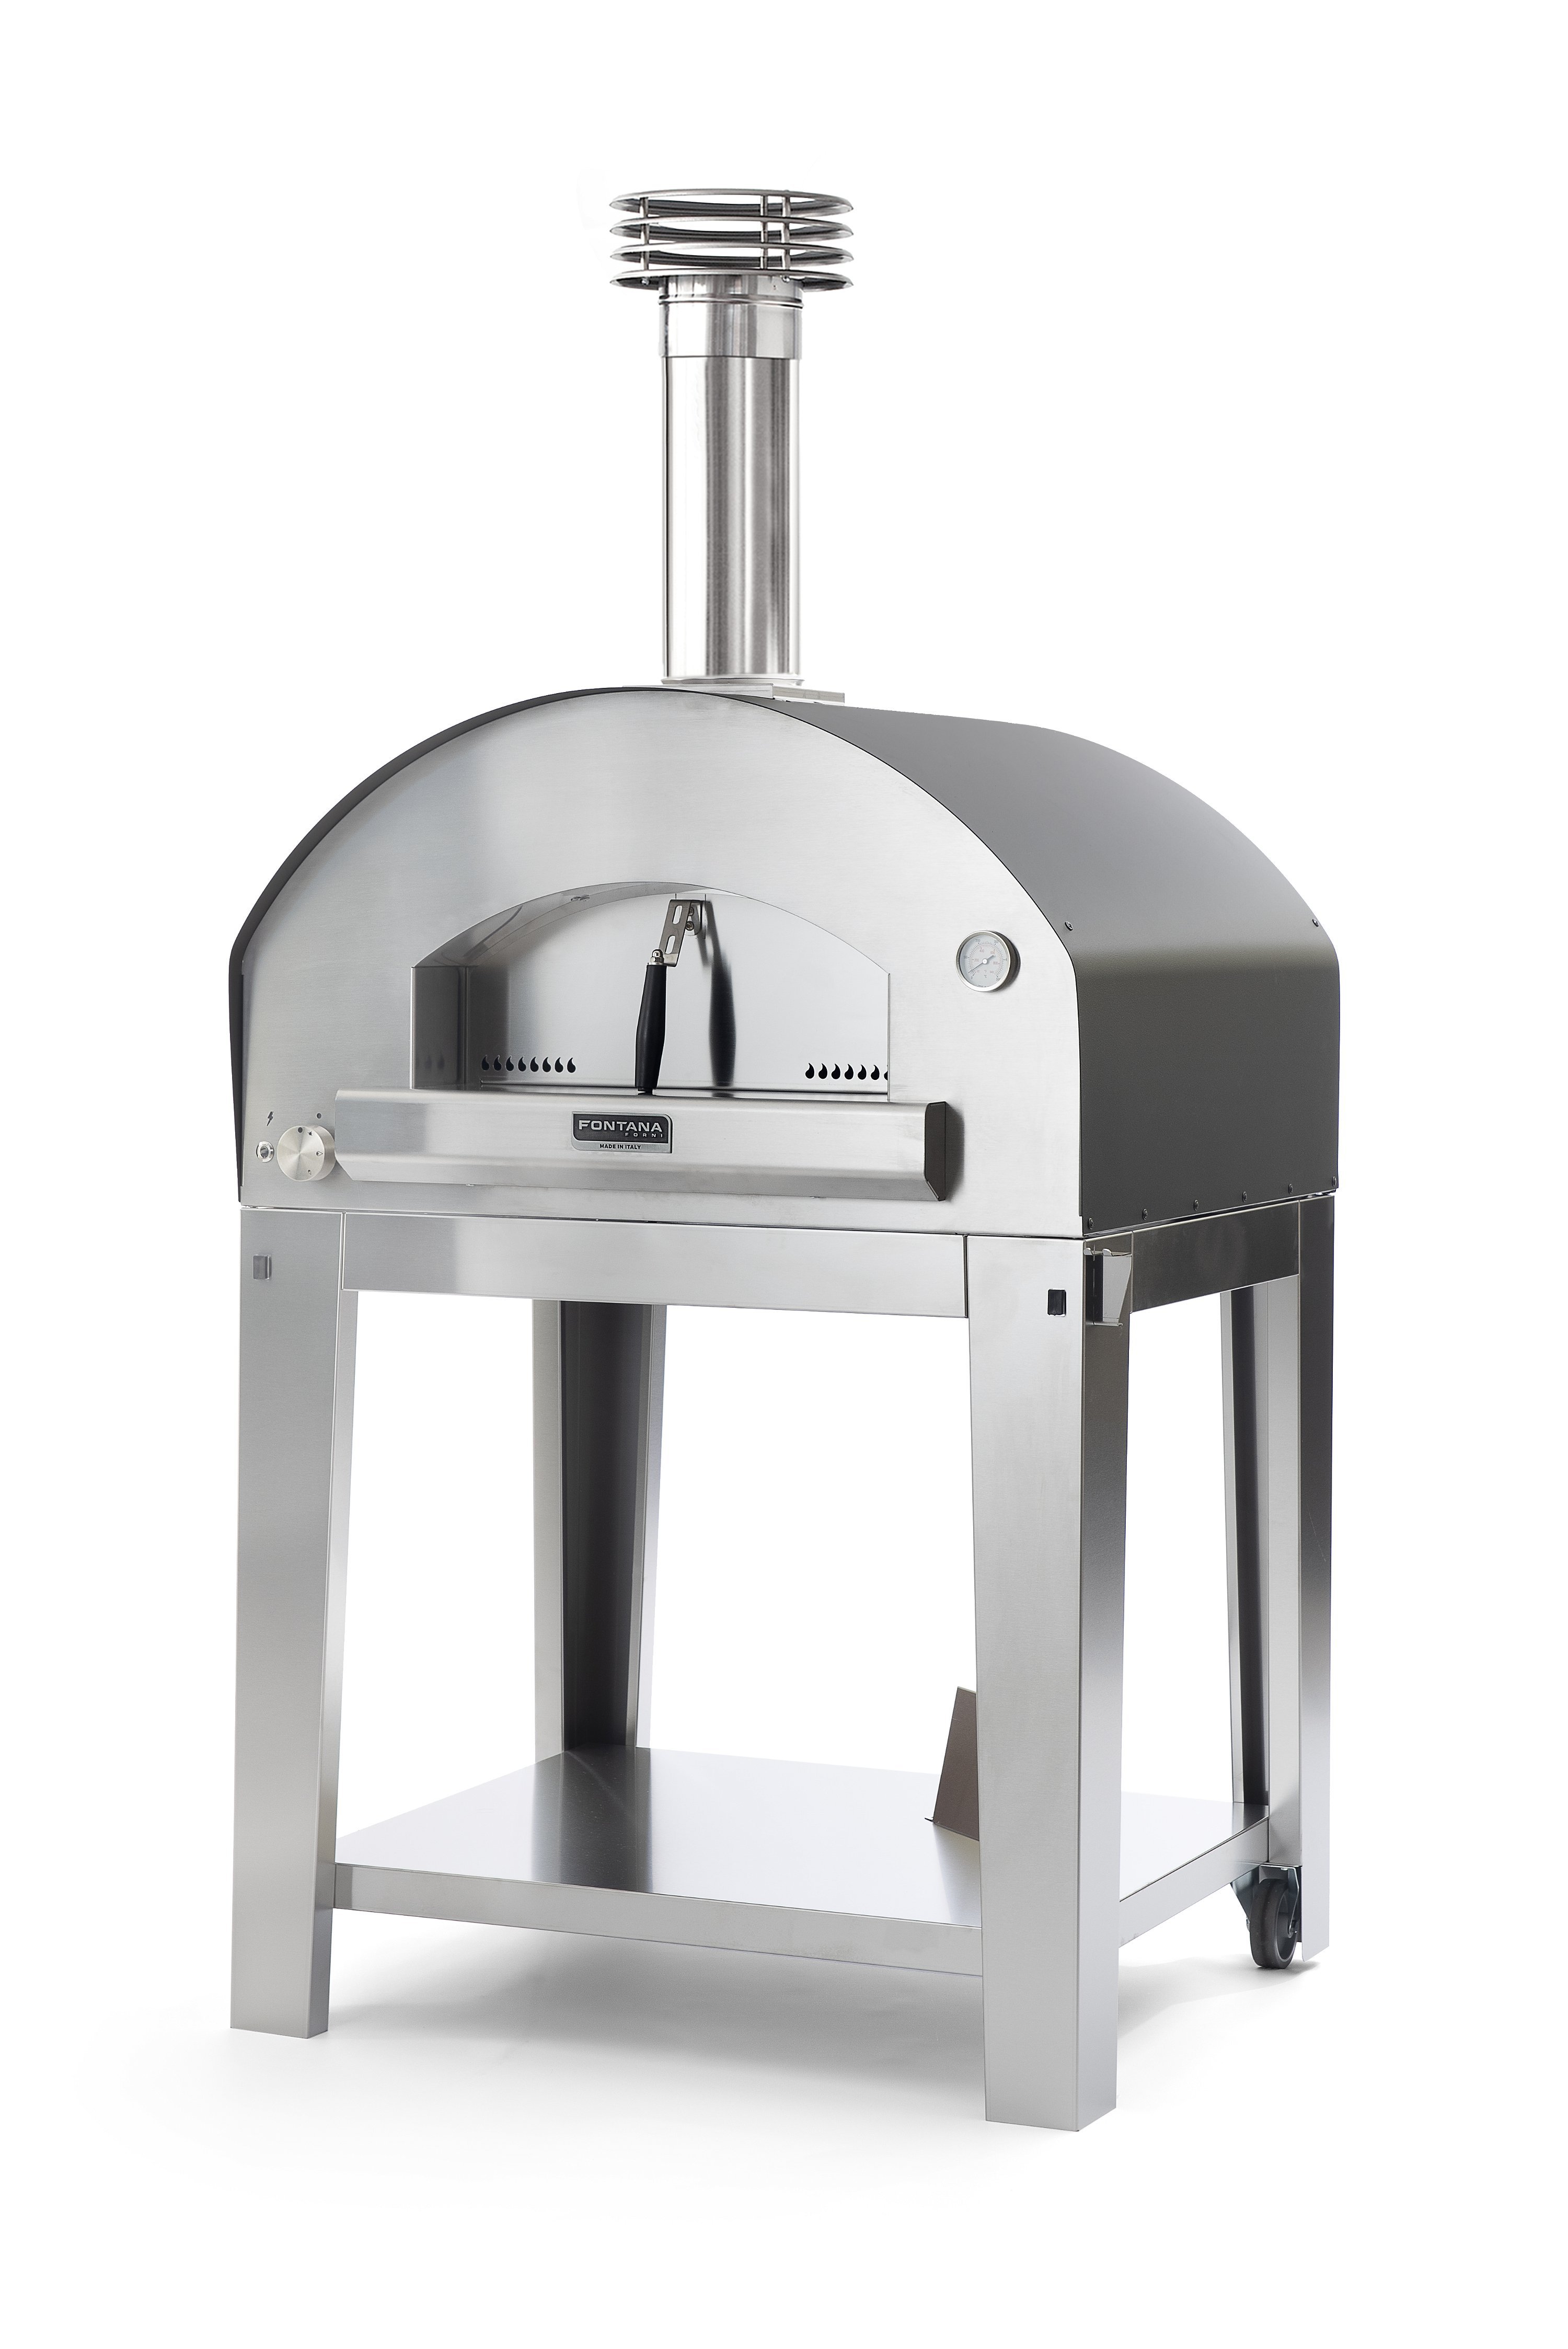 Dome oven Fontana Mangiafuoco with gas firing, pizza oven for outdoor kitchen